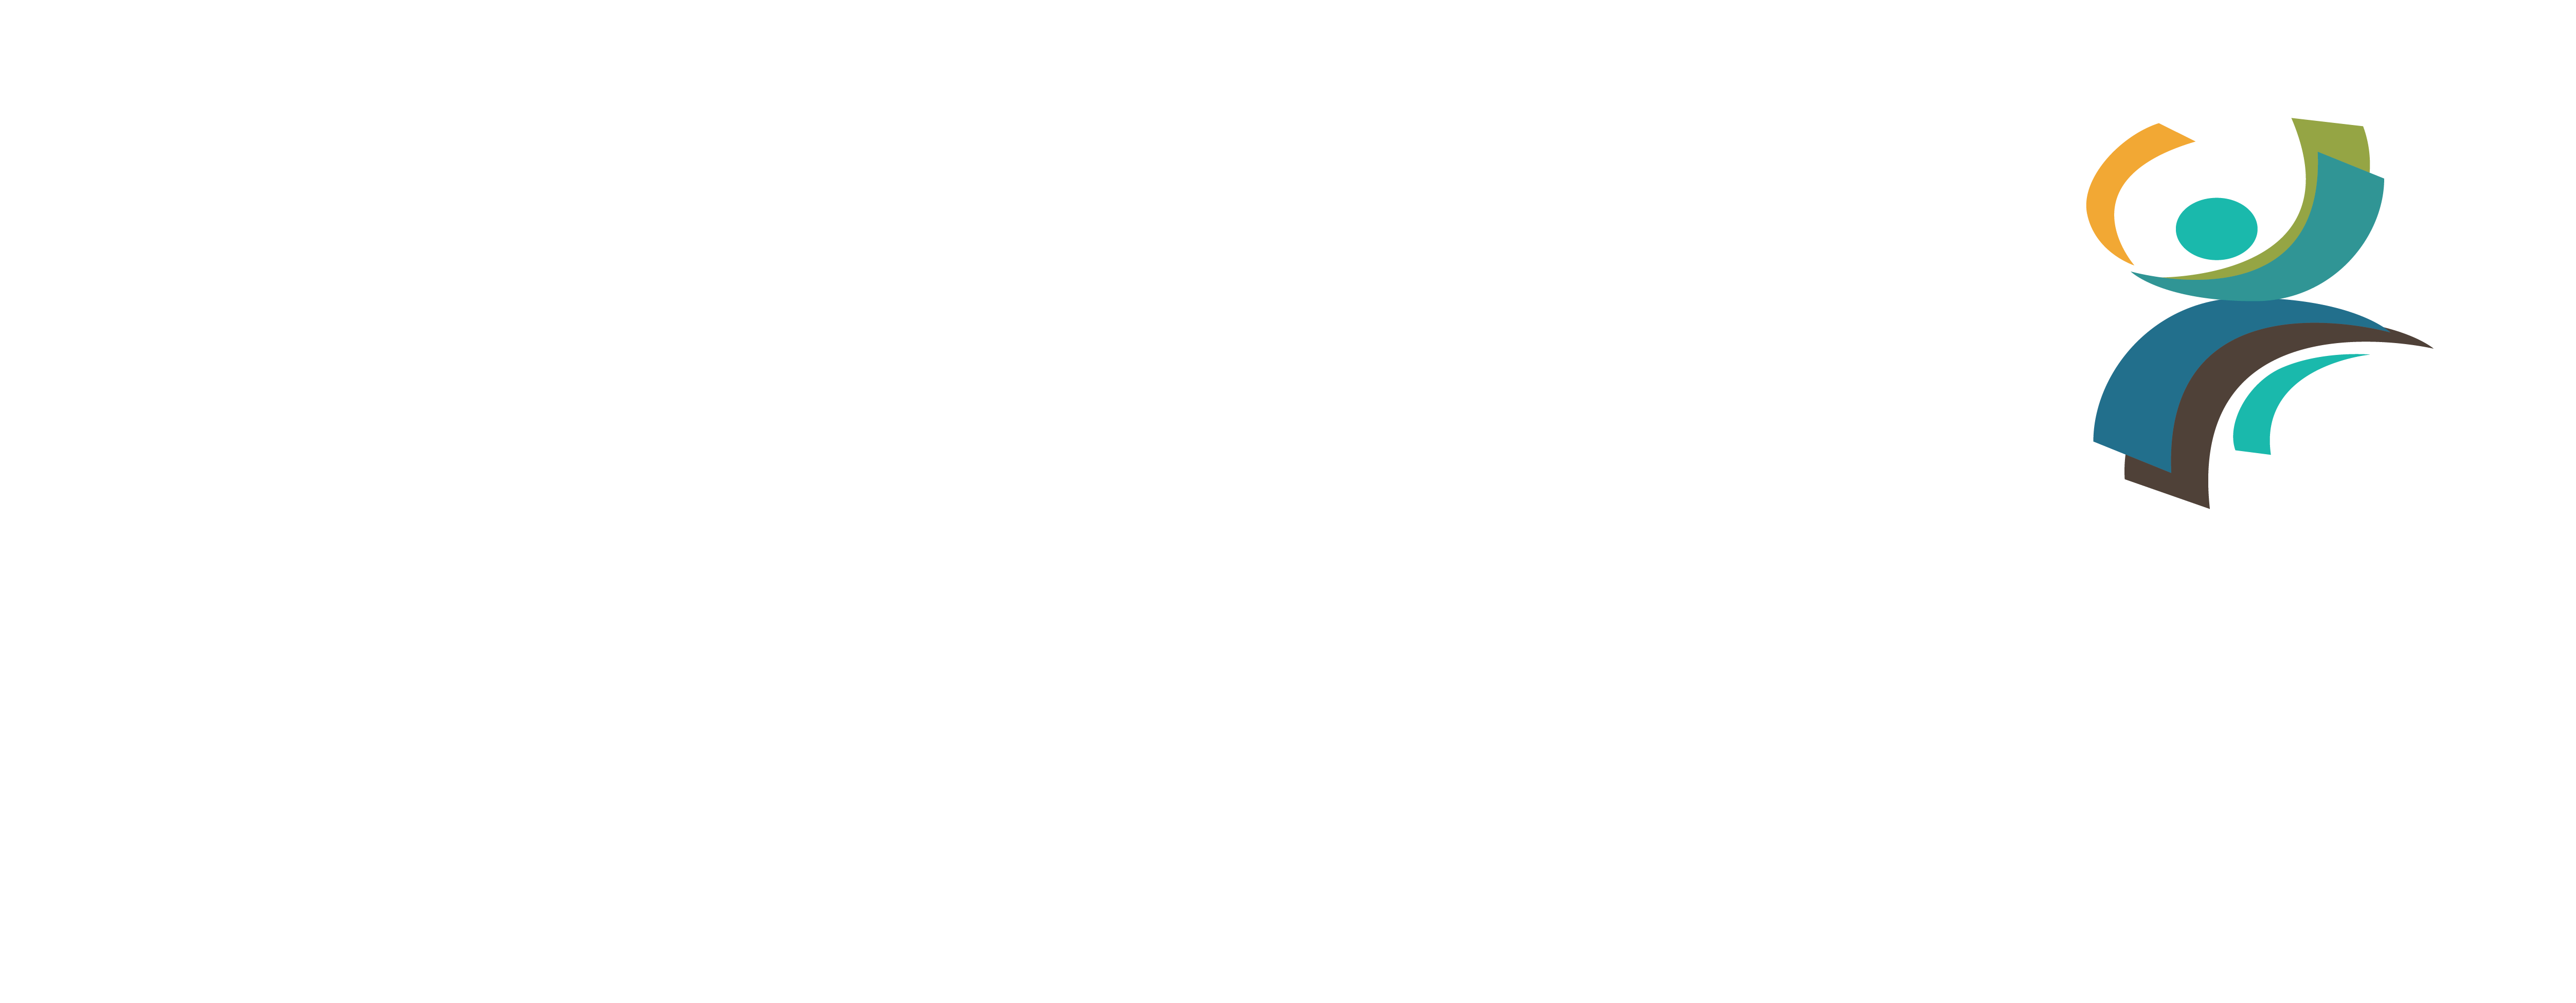 Commit to Inclusion